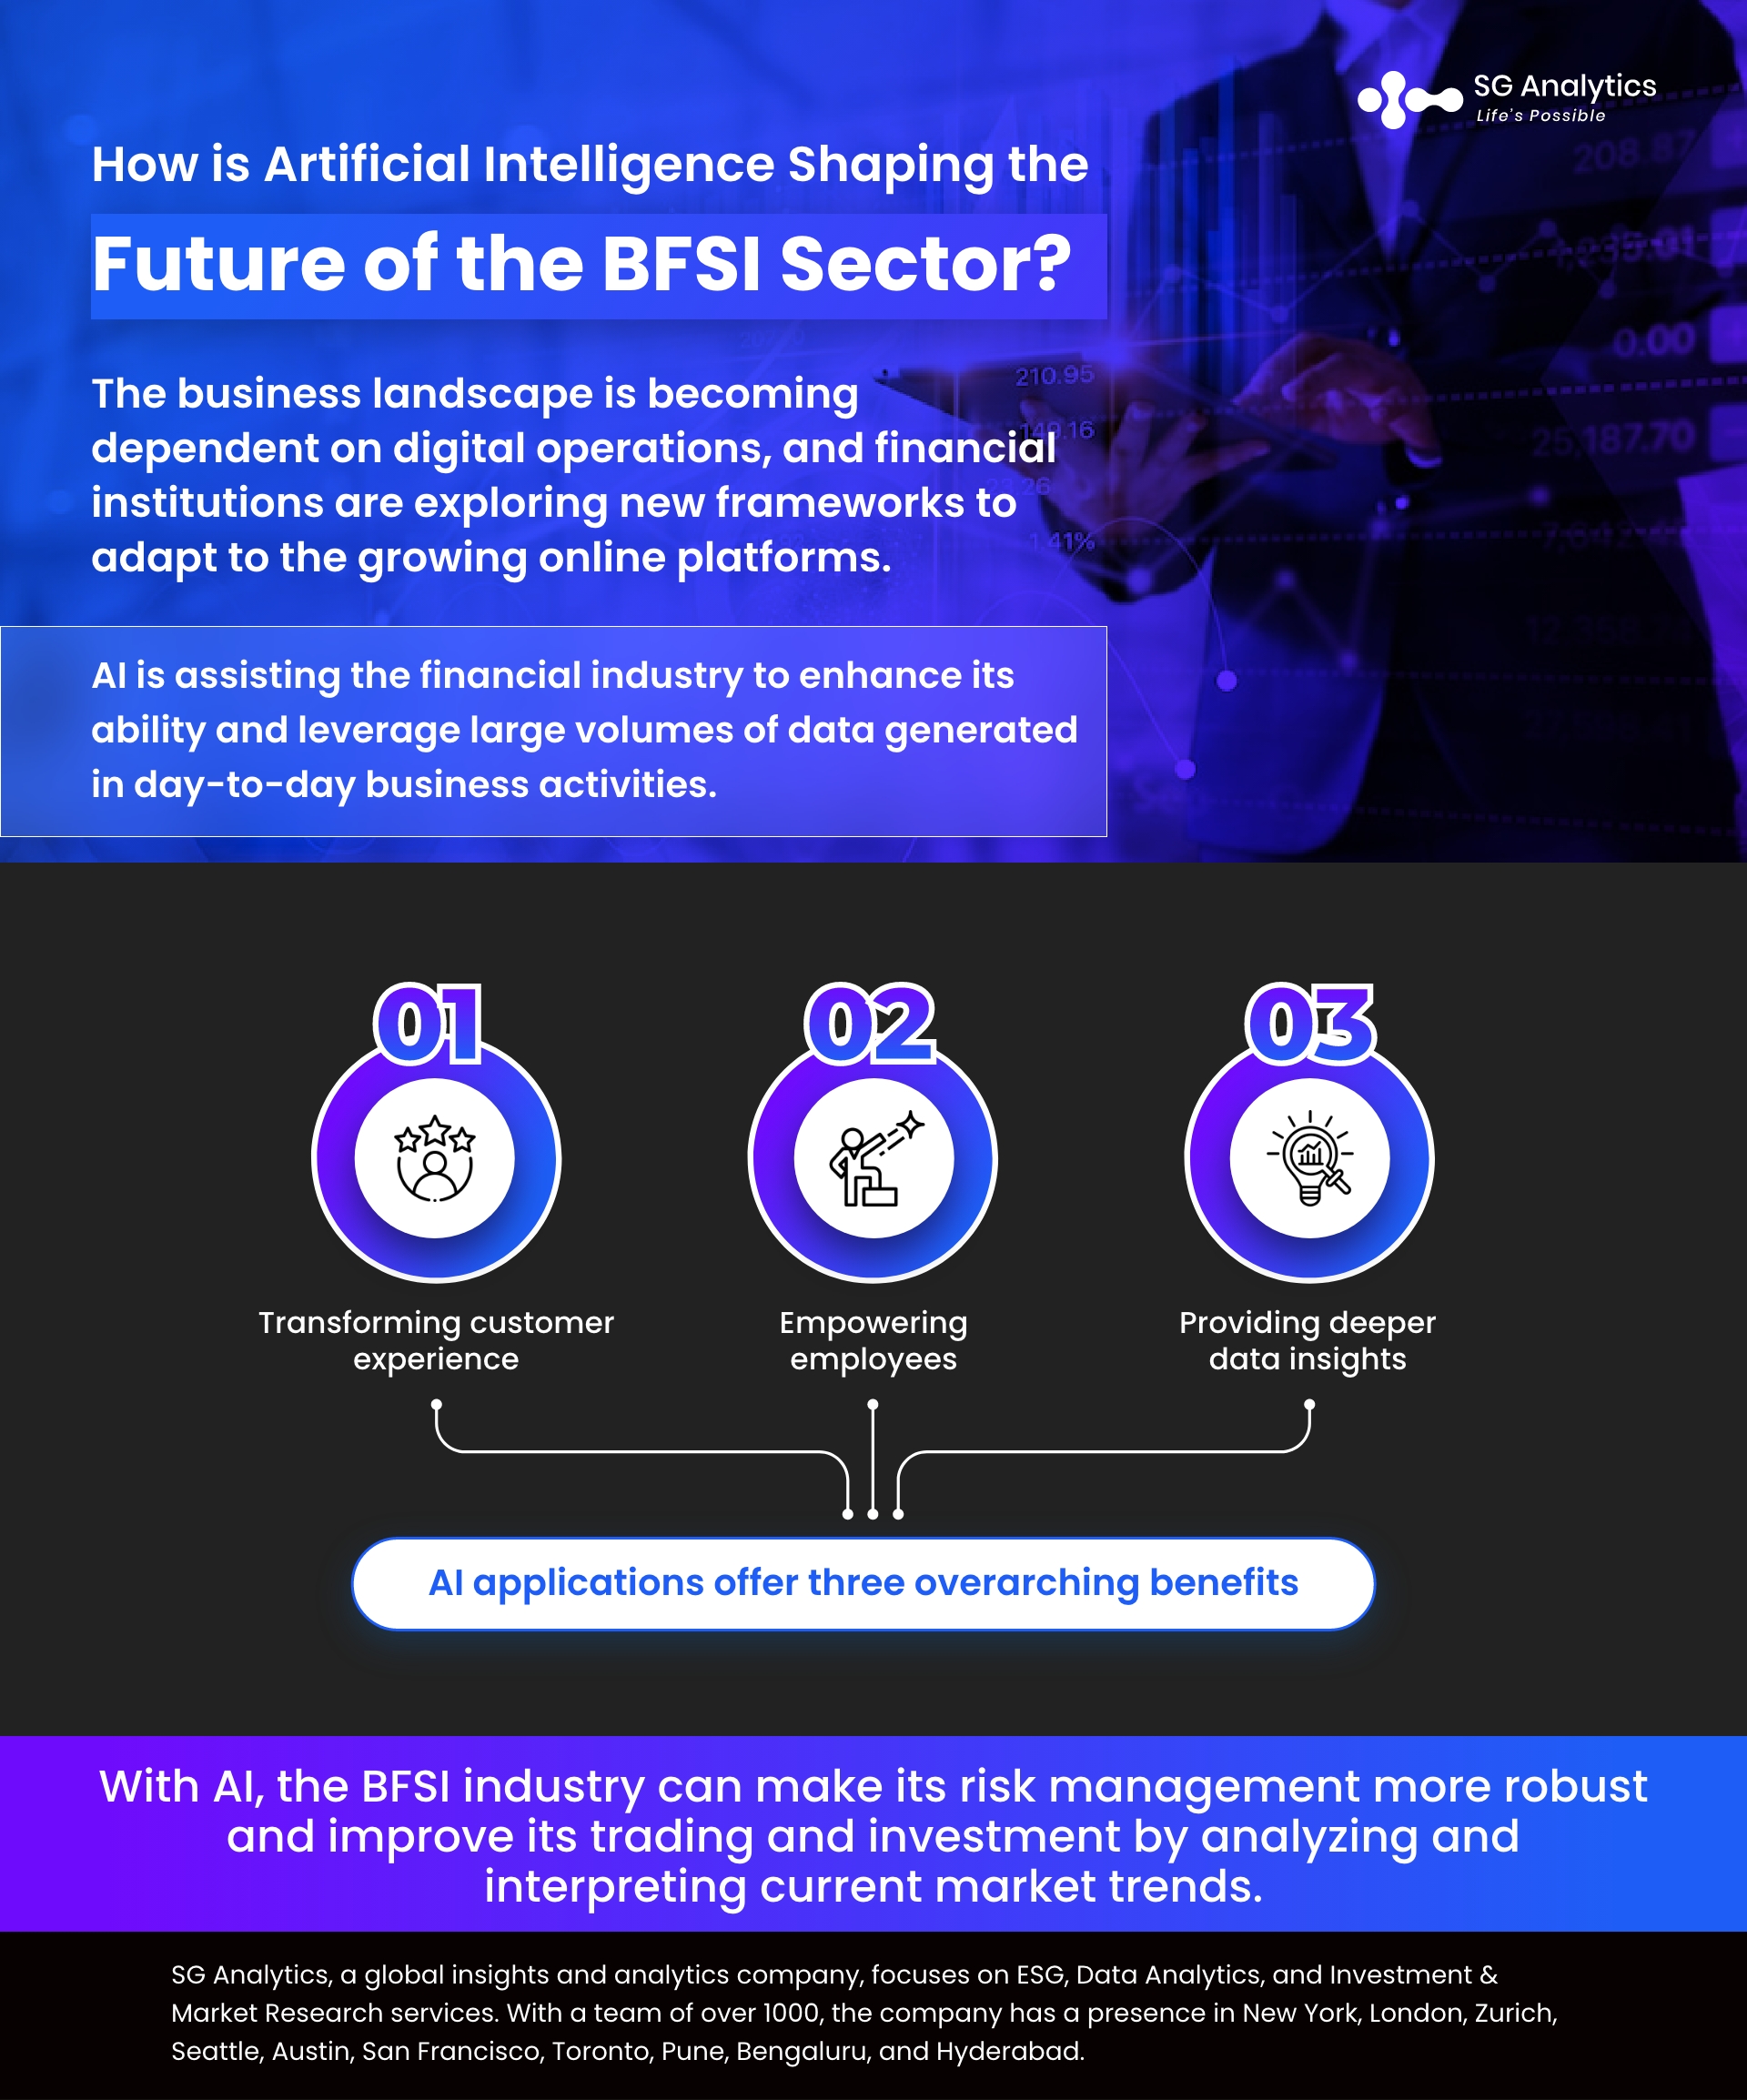 How is Artificial Intelligence Shaping the Future of the BFSI Sector